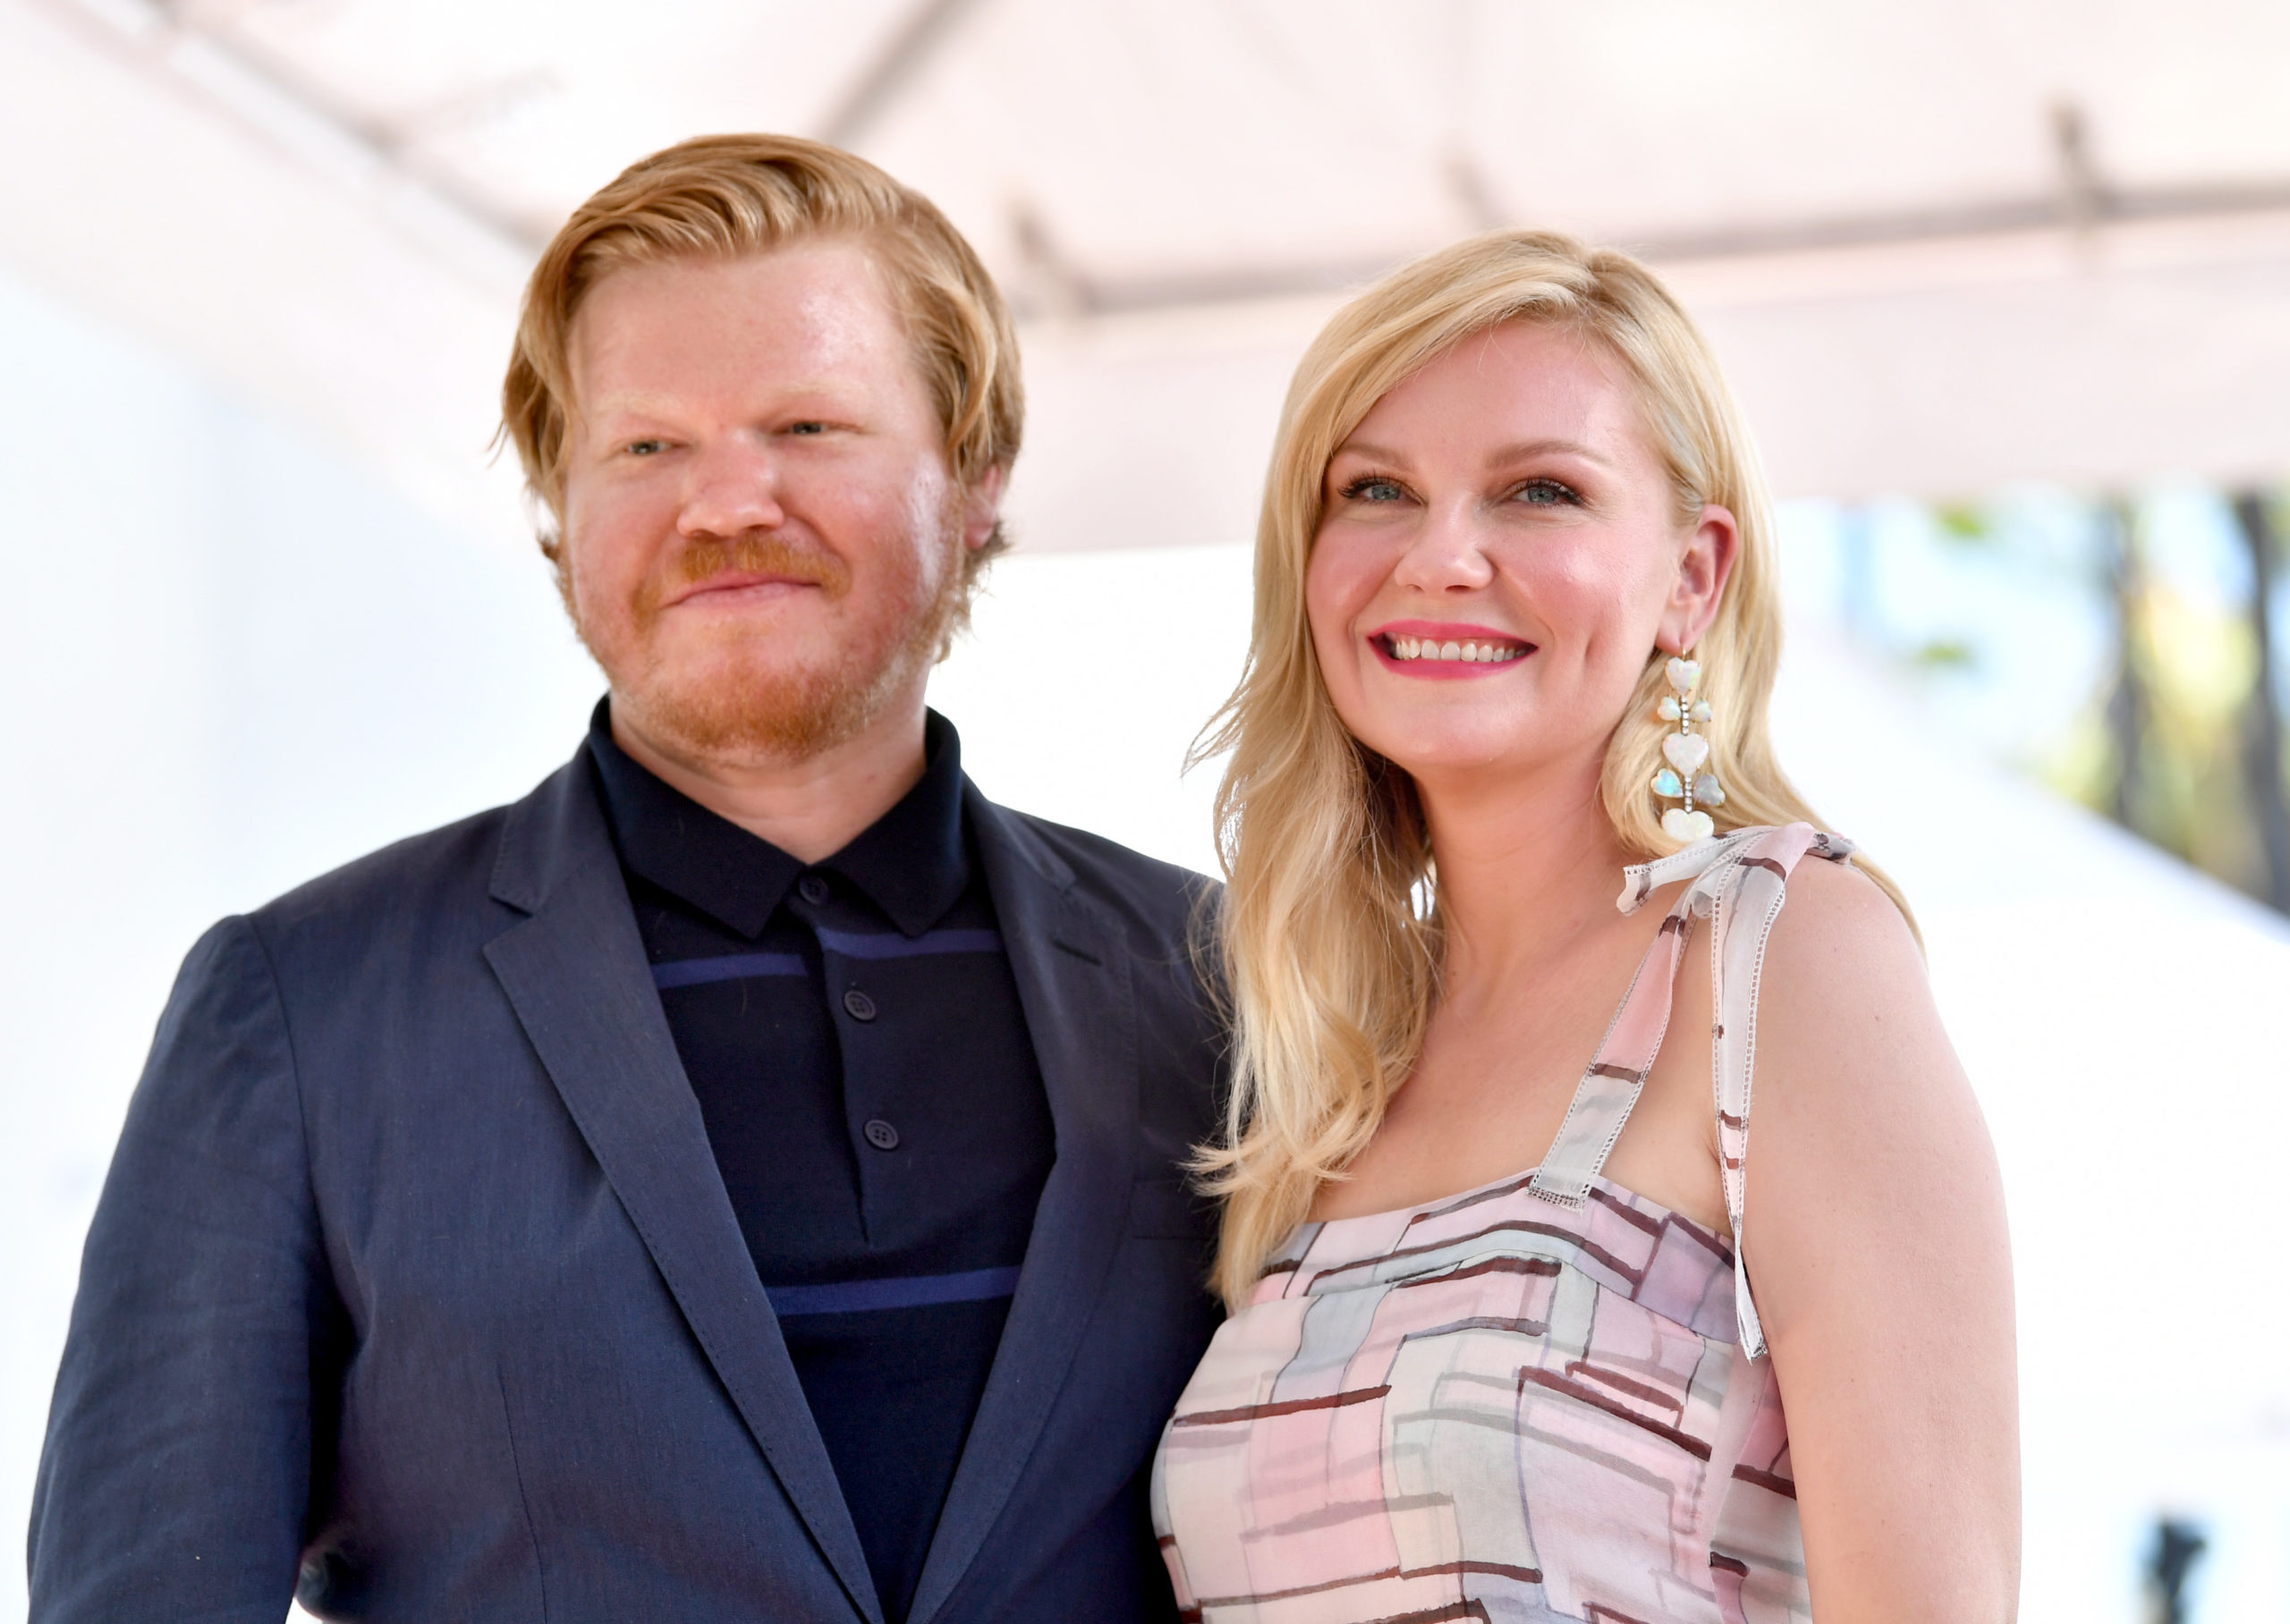 Who Is Married To Kirsten Dunst